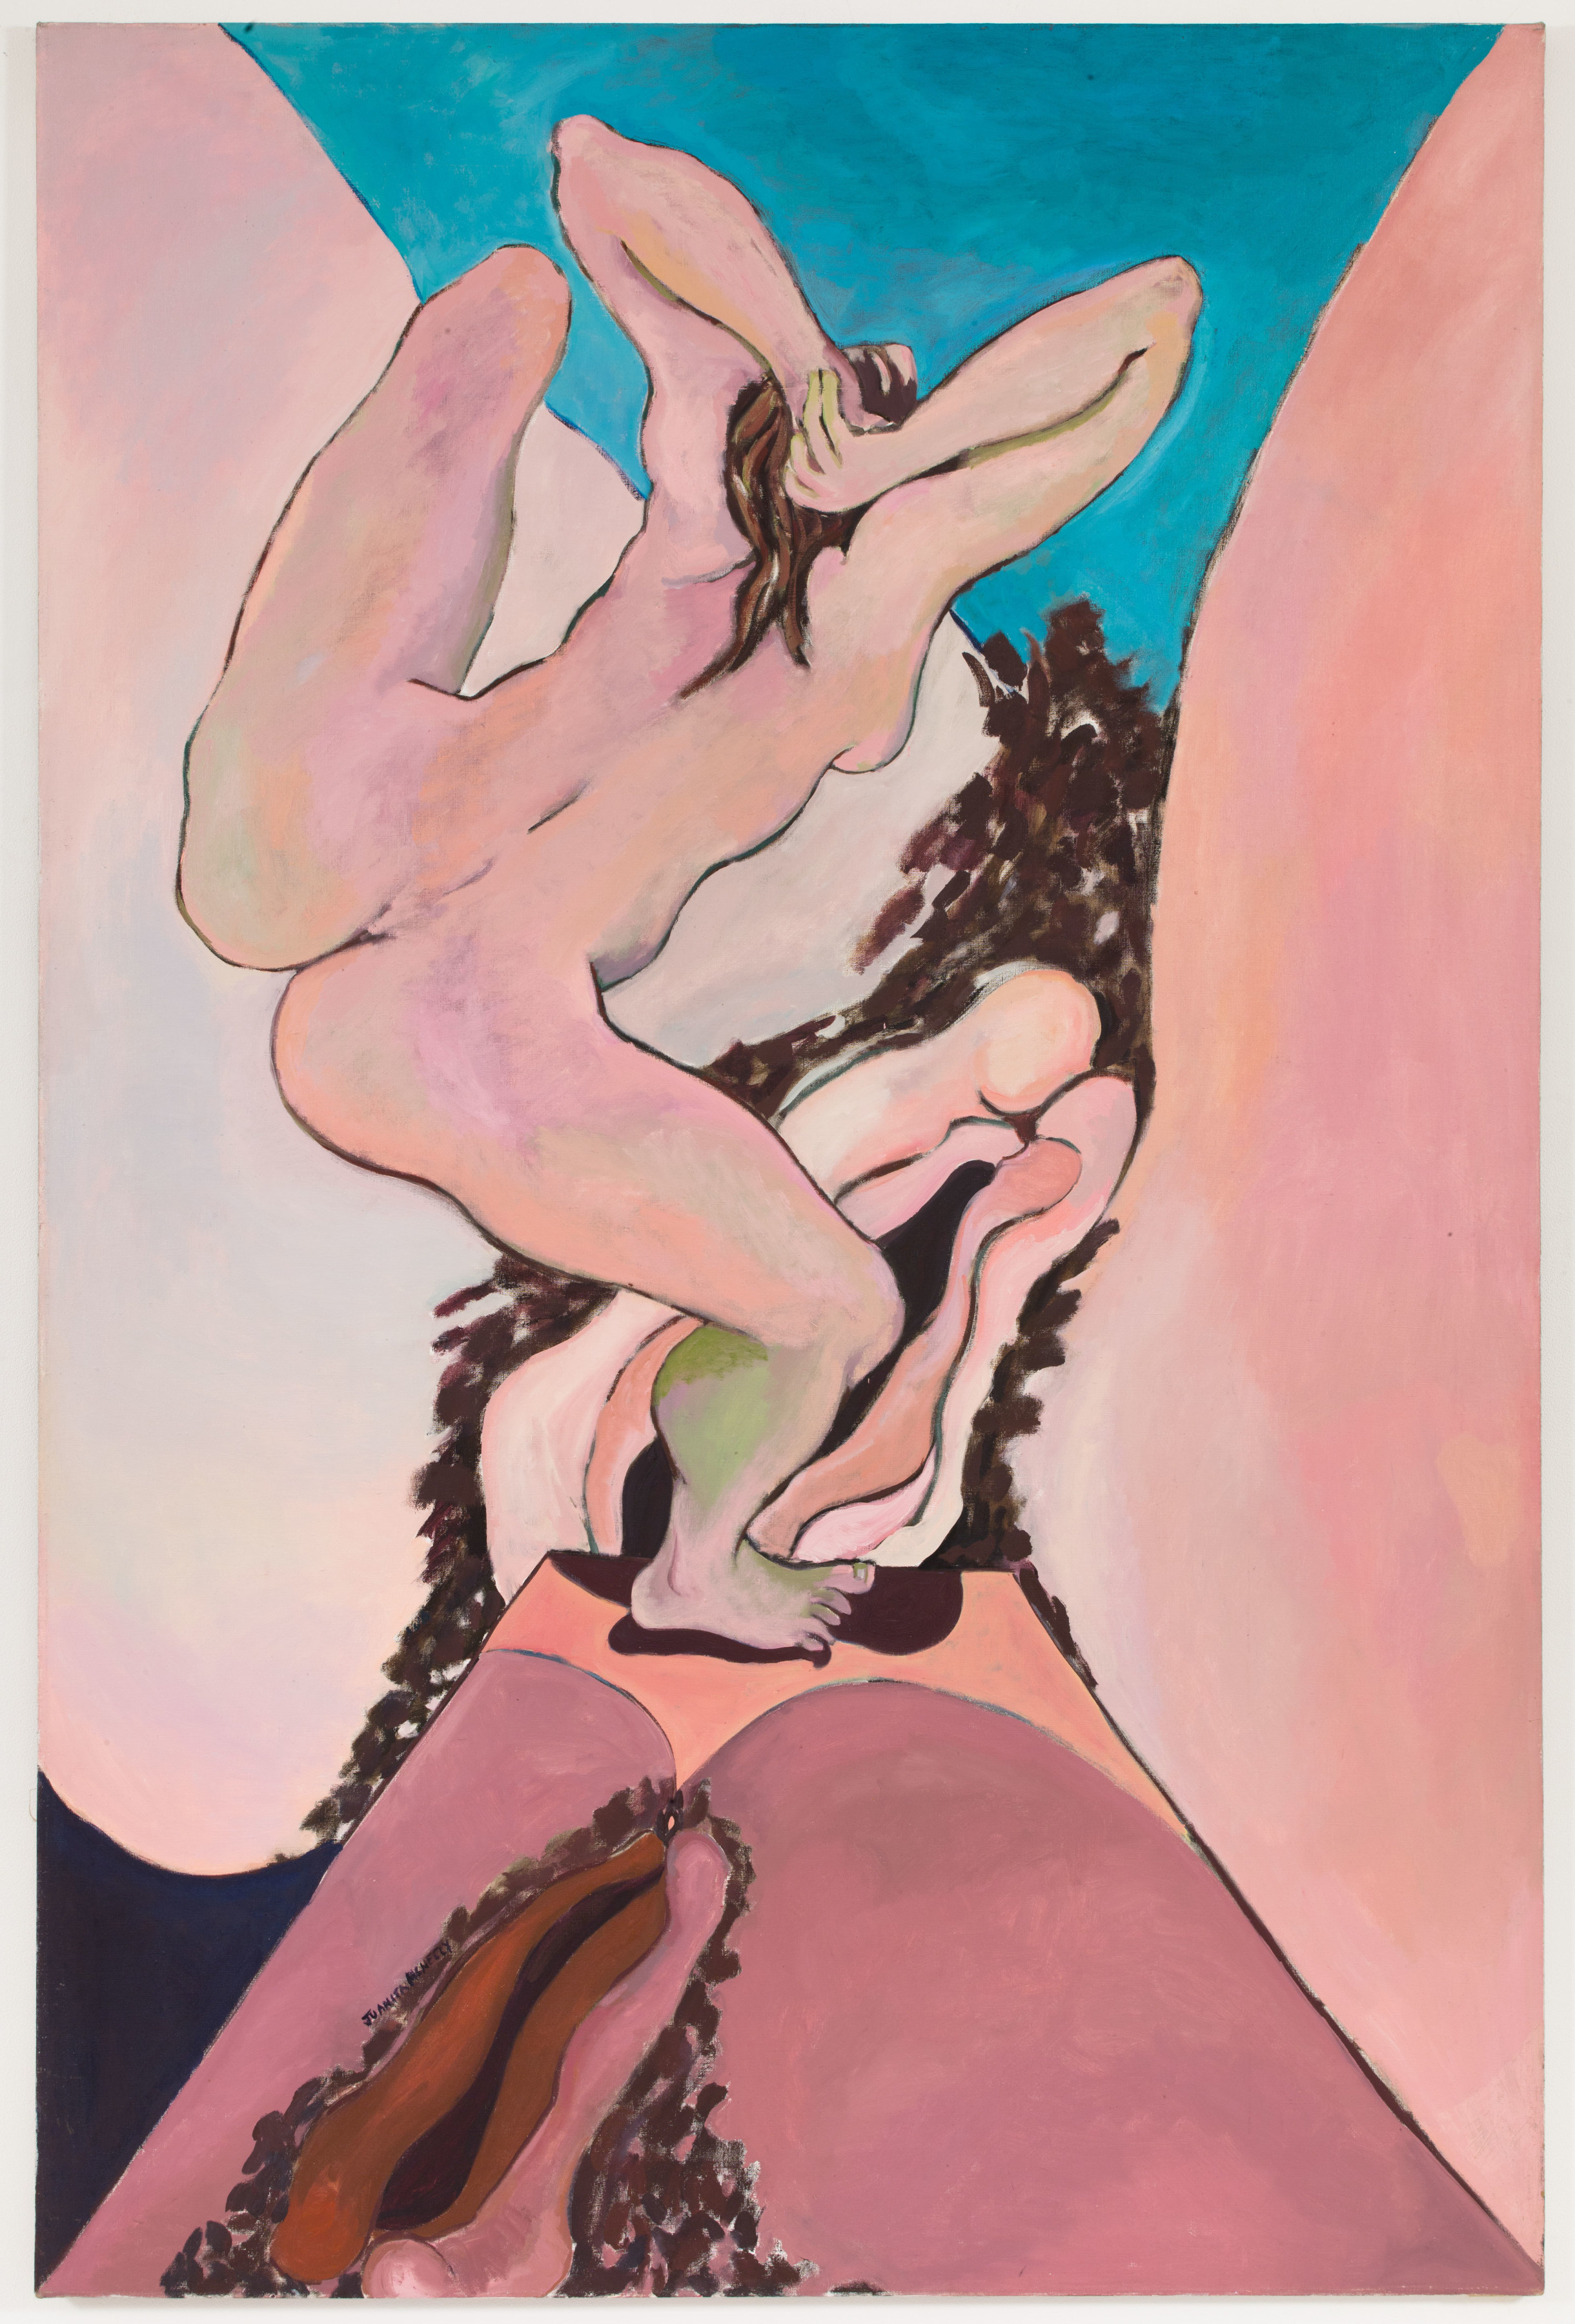 Juanita McNeely: The Body Laid Bare - Features - Independent Art Fair